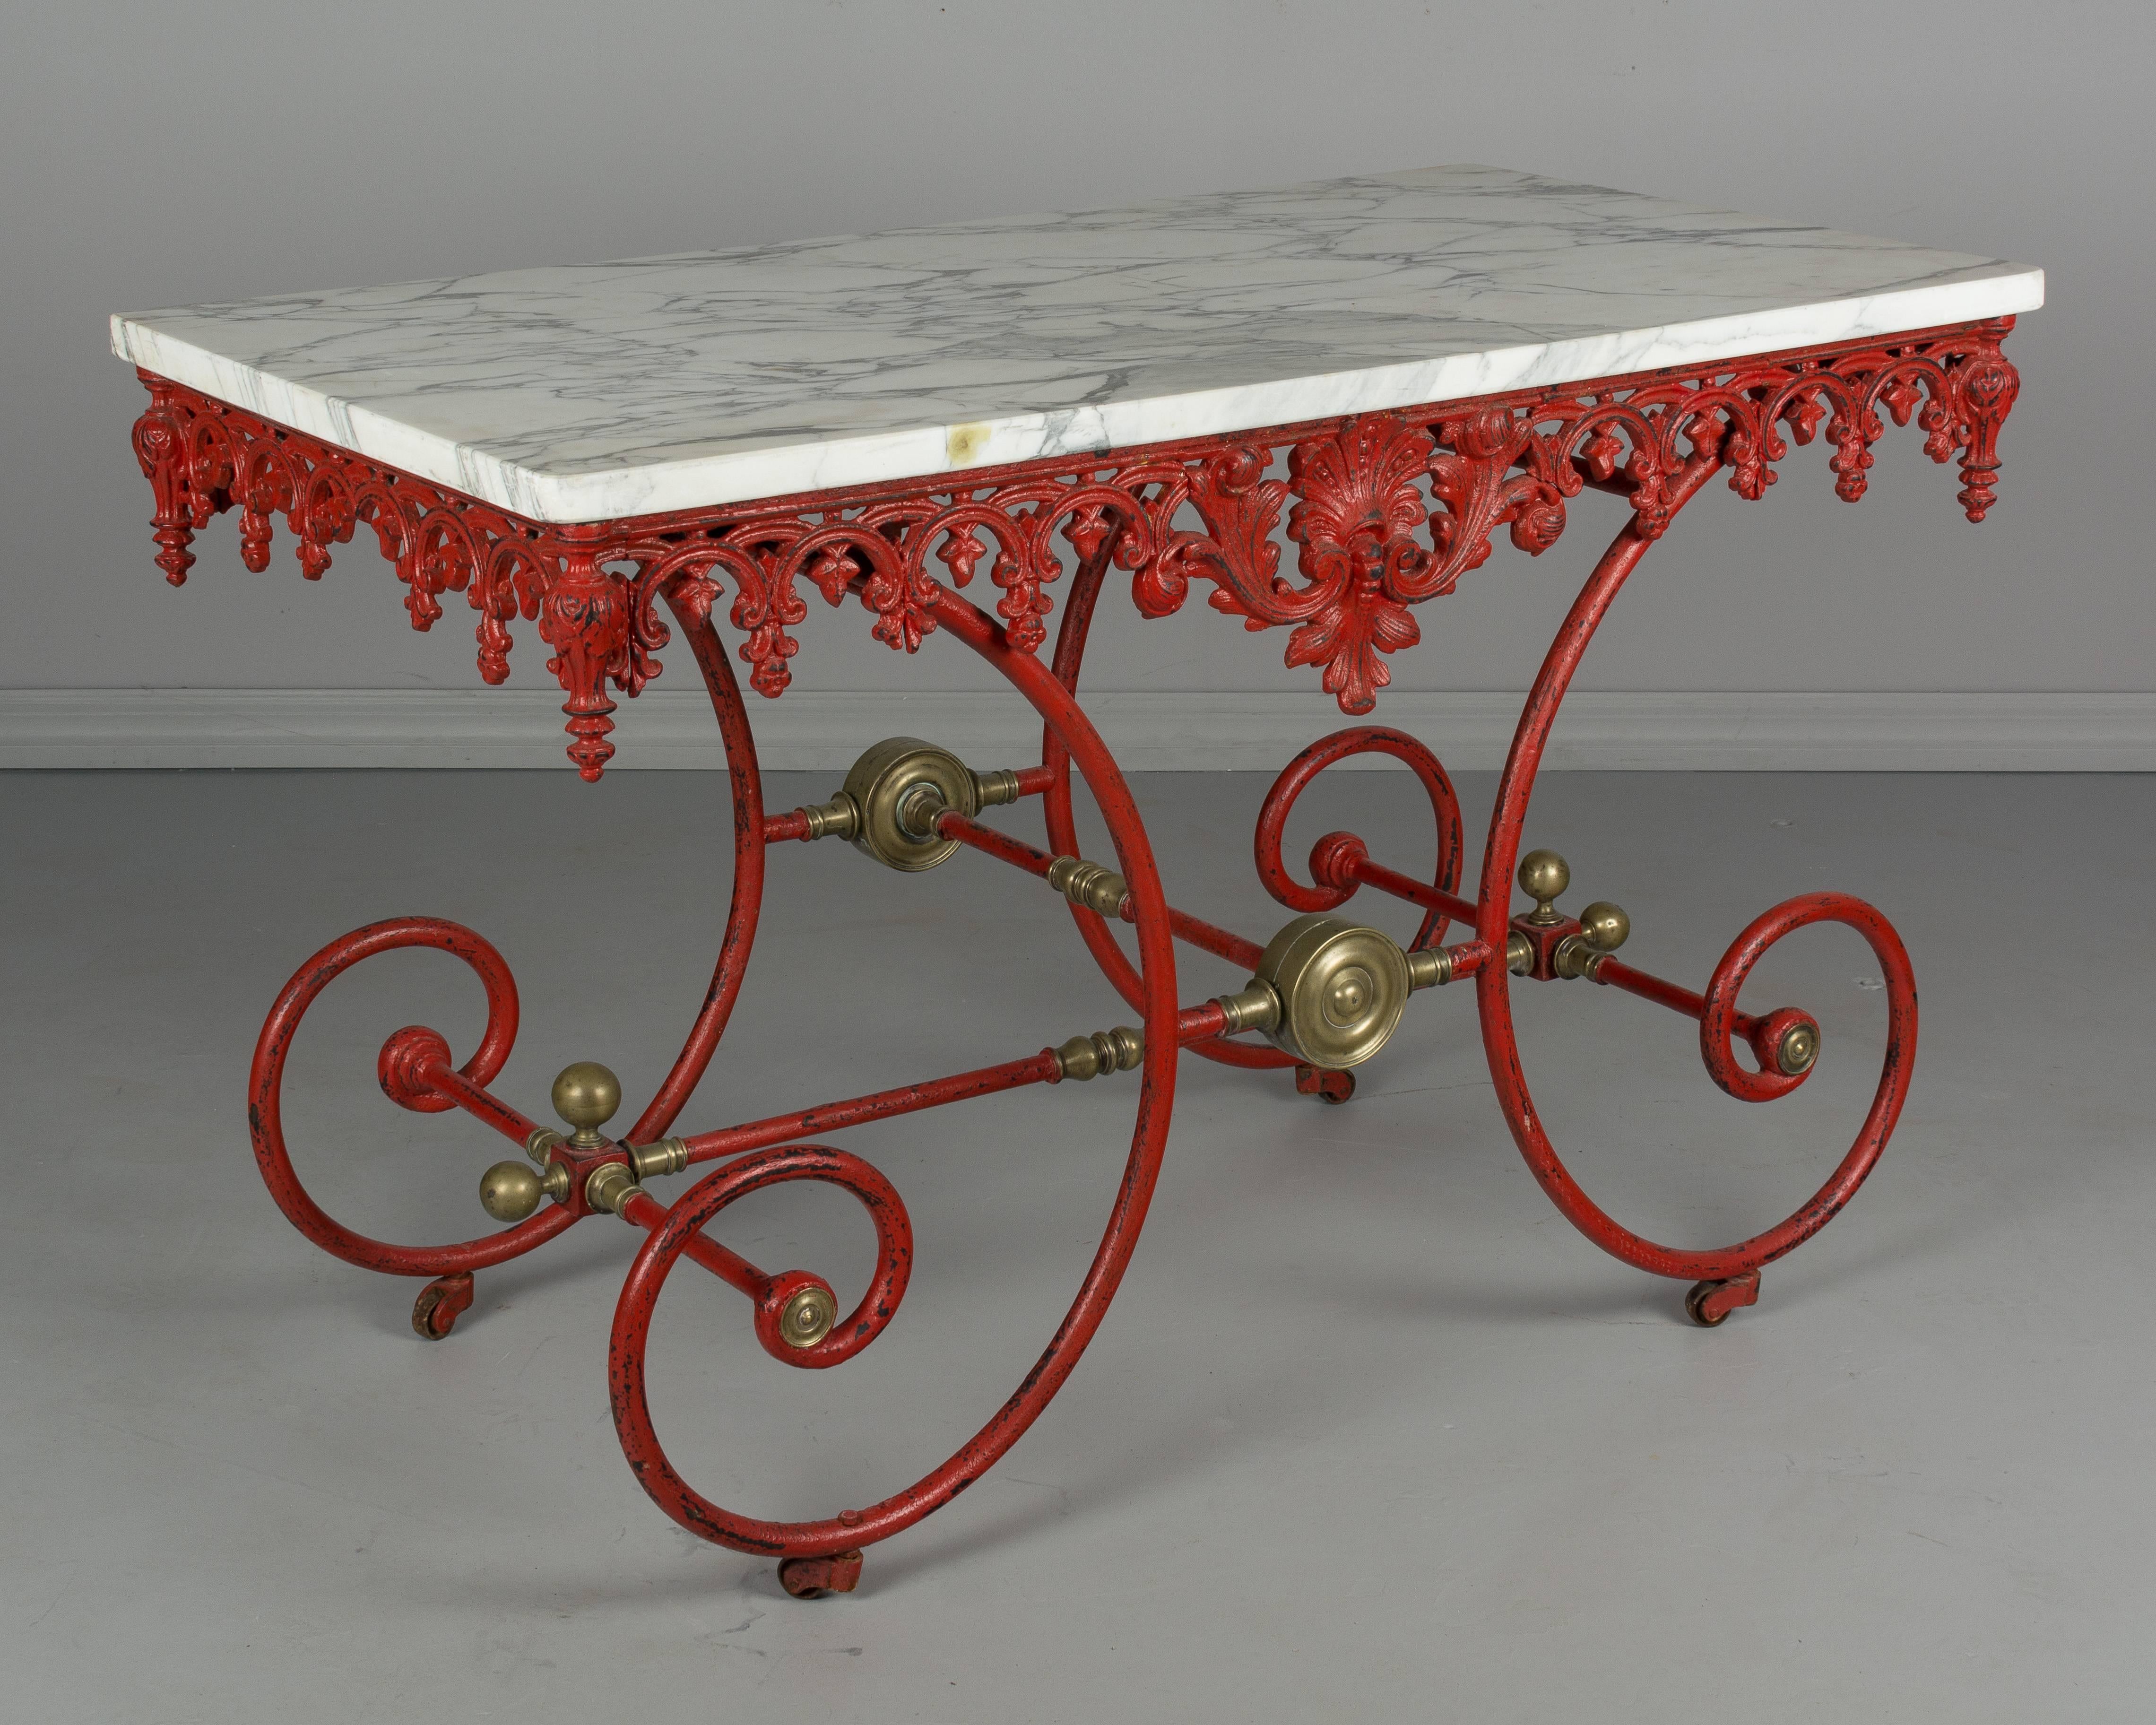 A 19th century French pastry table with original brilliant red painted patina. Curved wrought iron base with decorative brass hardware. Ornate cast iron frieze around the perimeter with large acanthus leaves and finials at each corner. Original